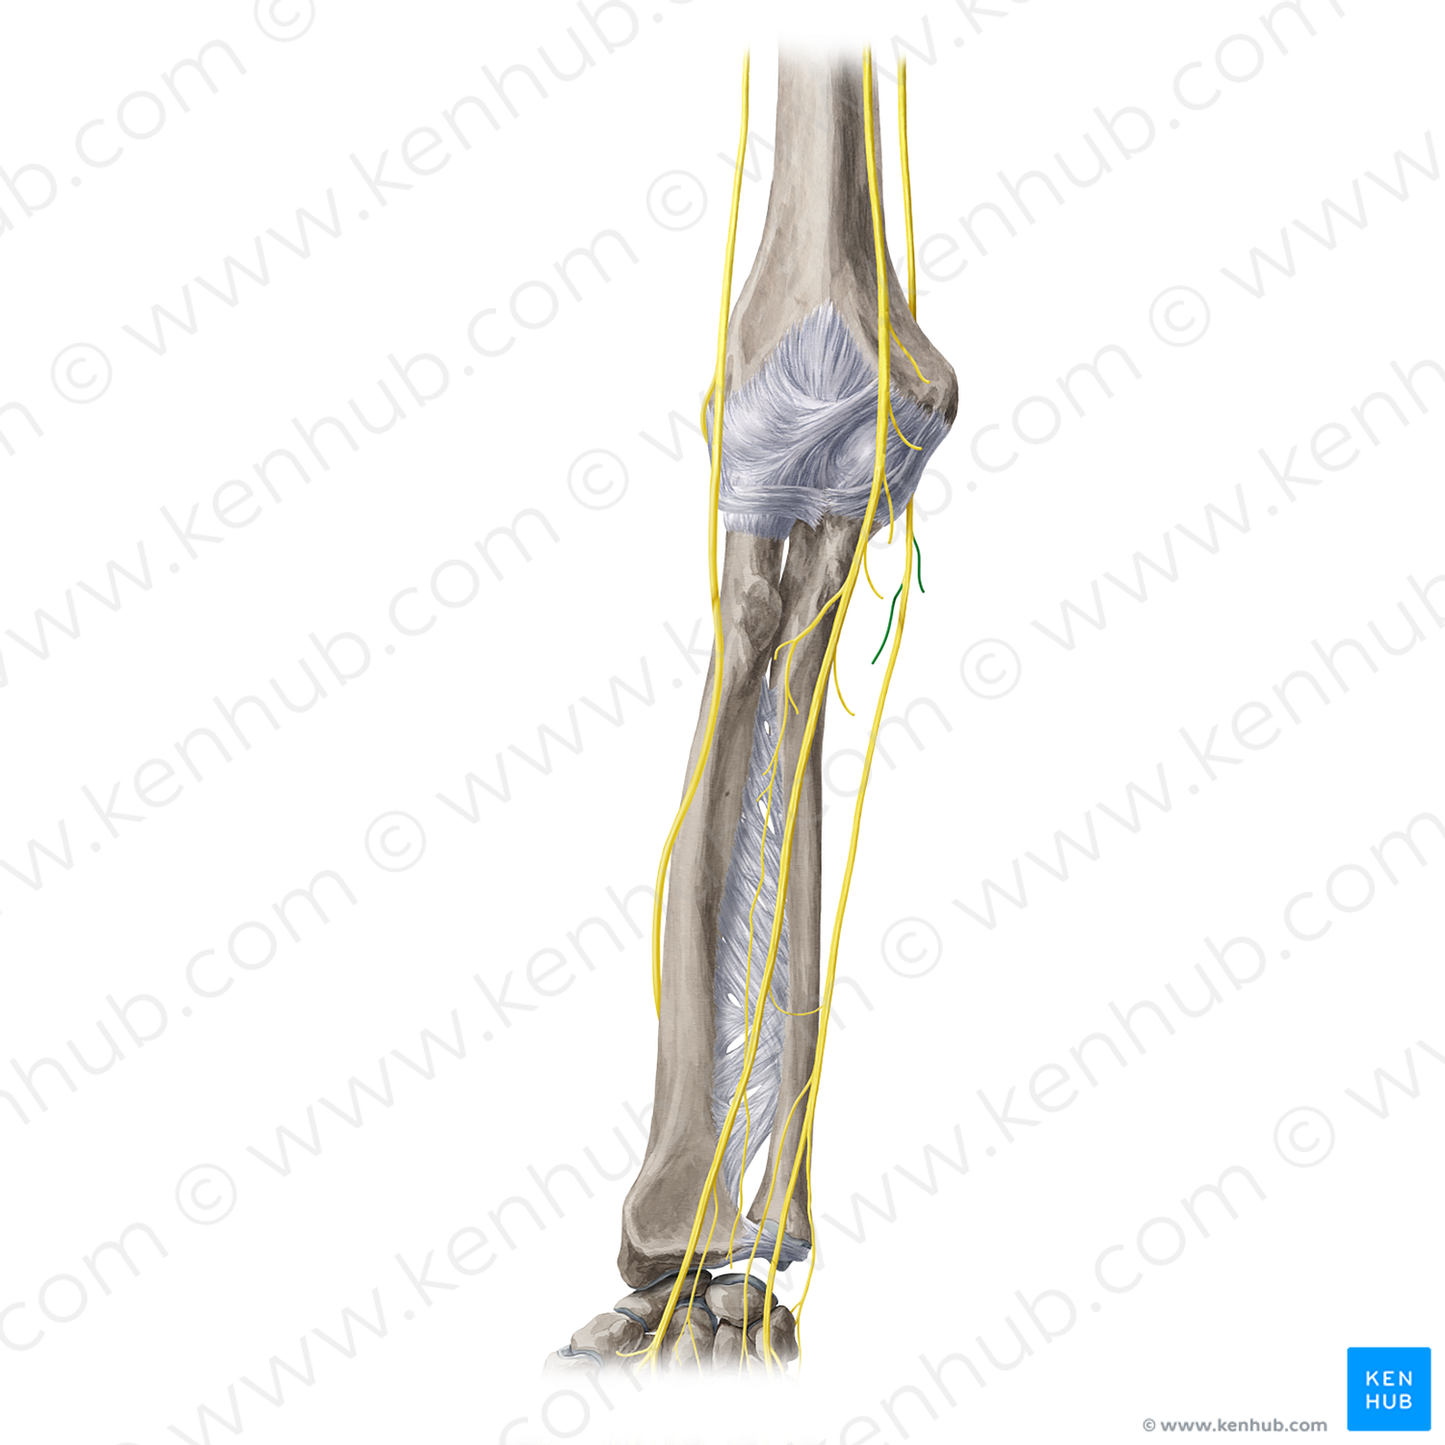 Muscular branches of ulnar nerve (#20422)